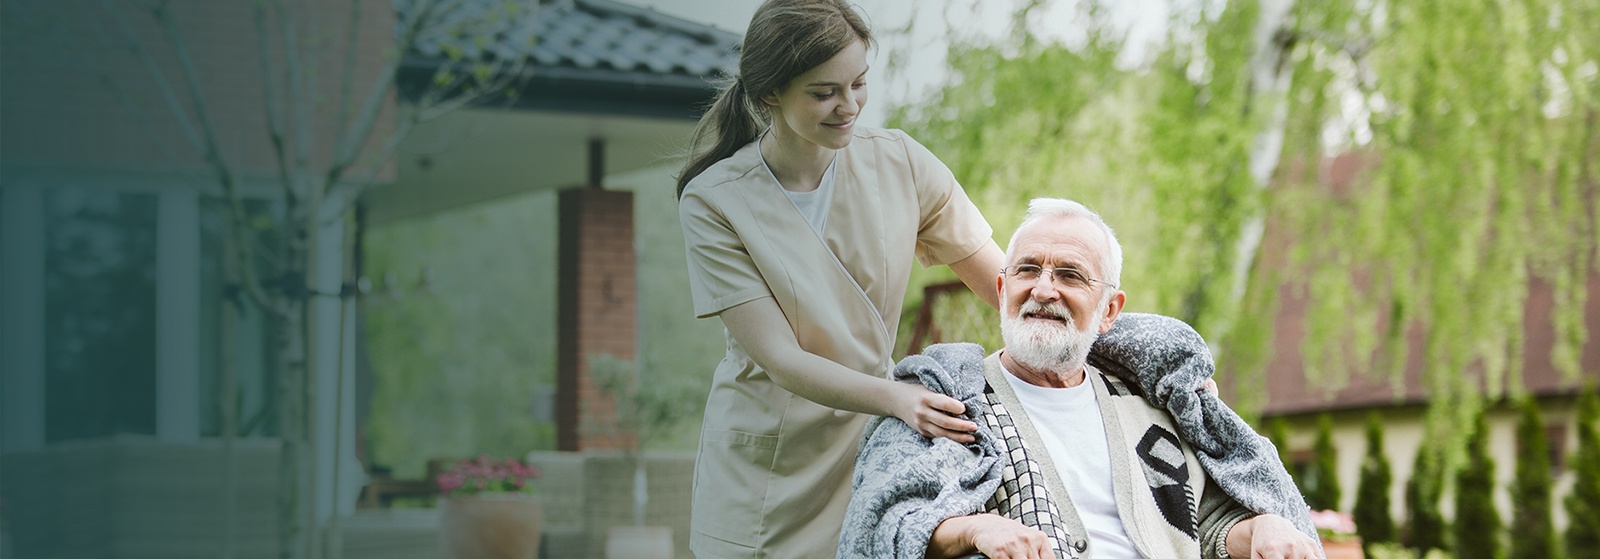  Home Care Services   Forsyth County